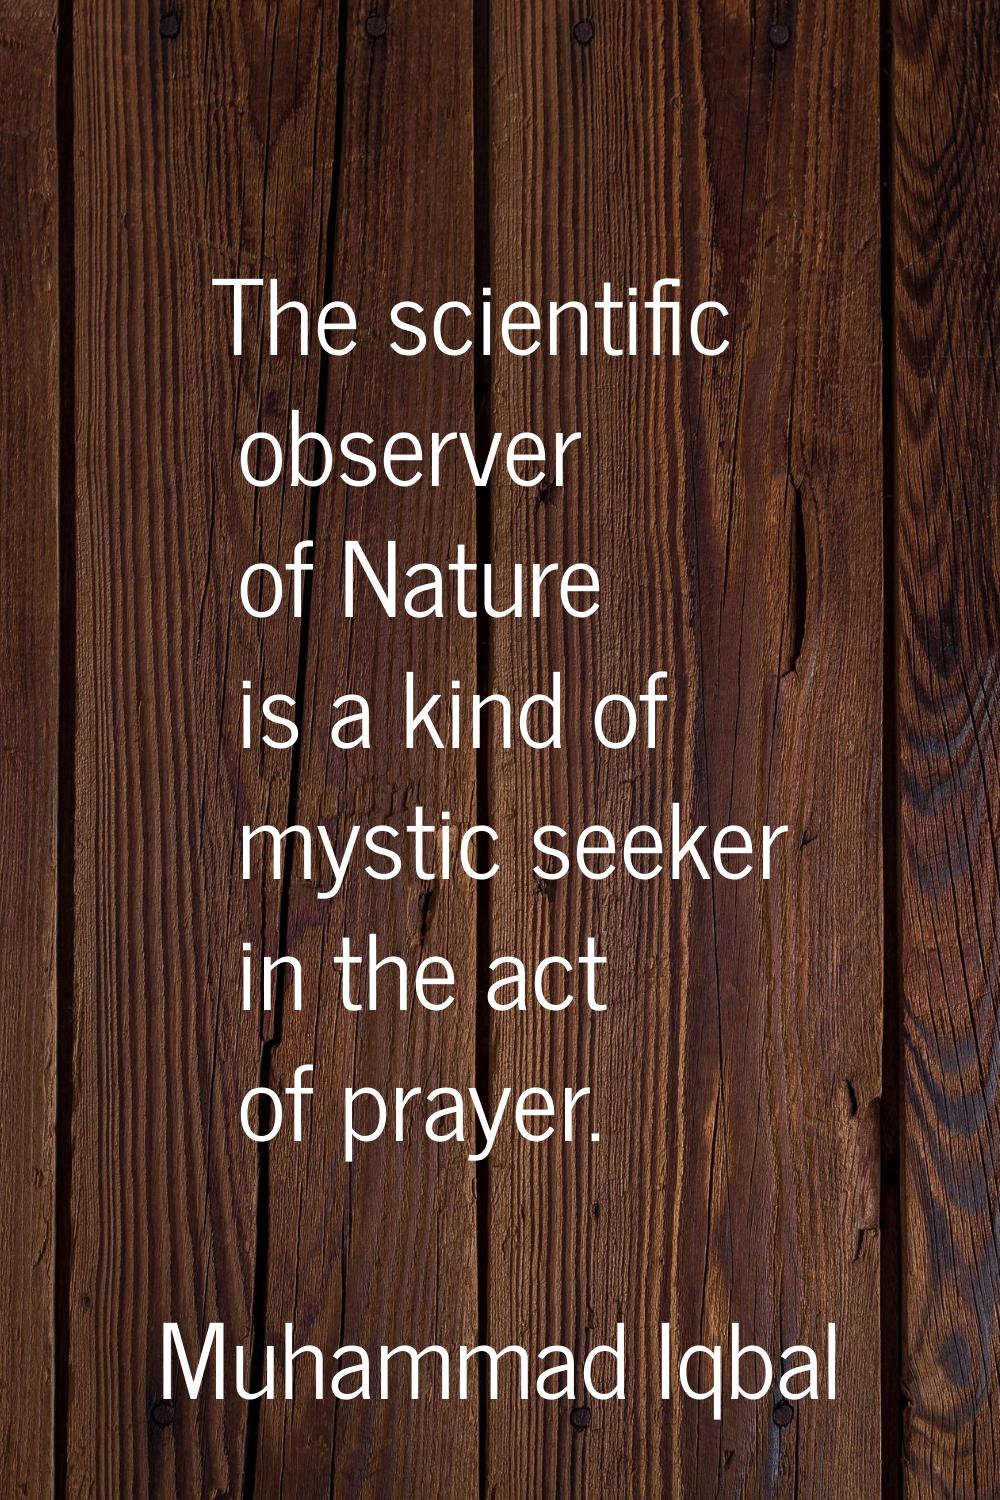 The scientific observer of Nature is a kind of mystic seeker in the act of prayer.